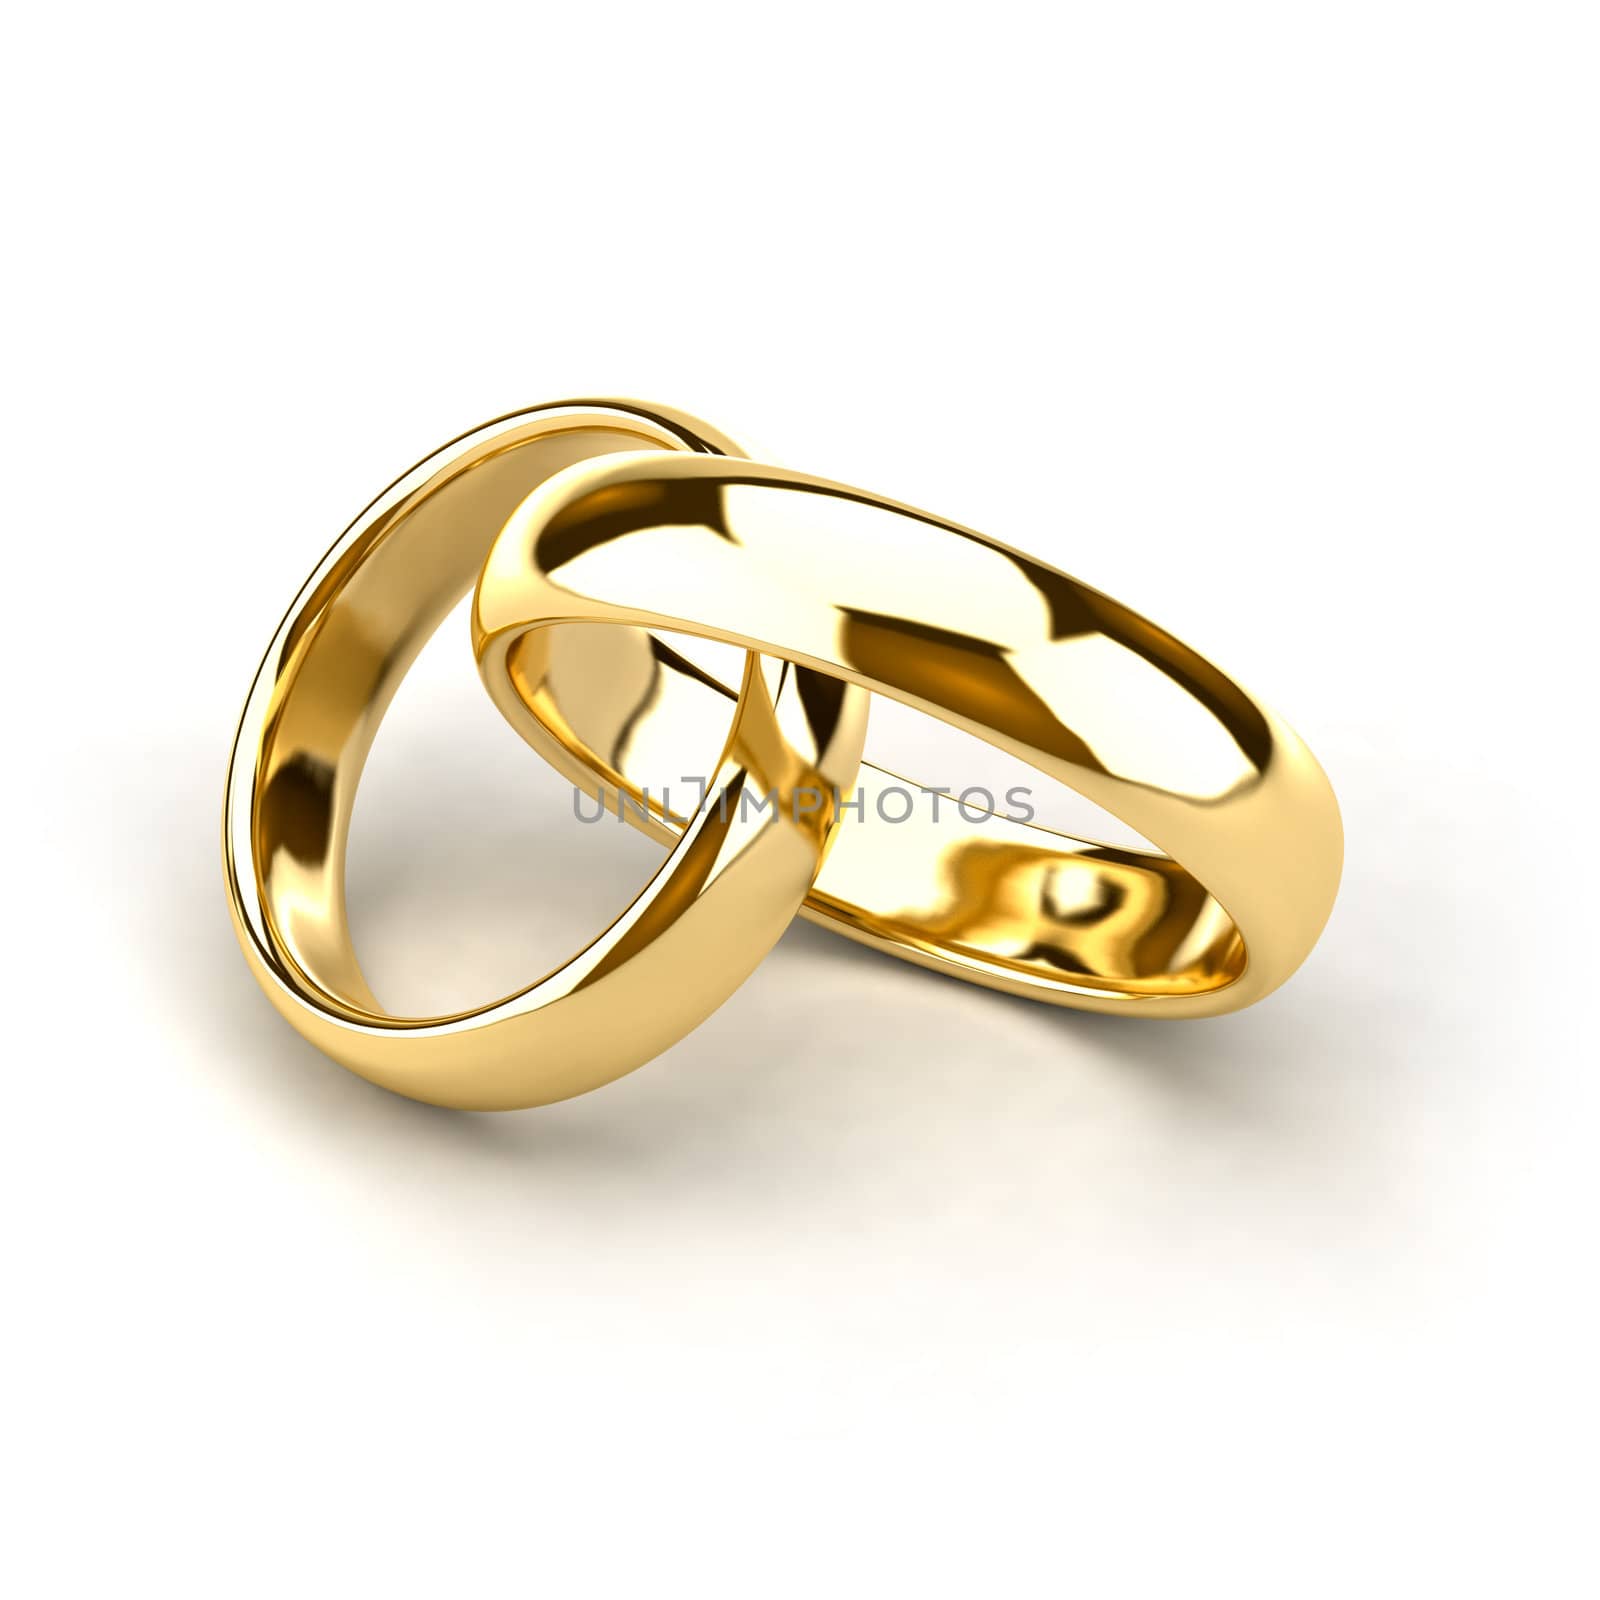 Two wedding rings, like links in the chain are interconnected